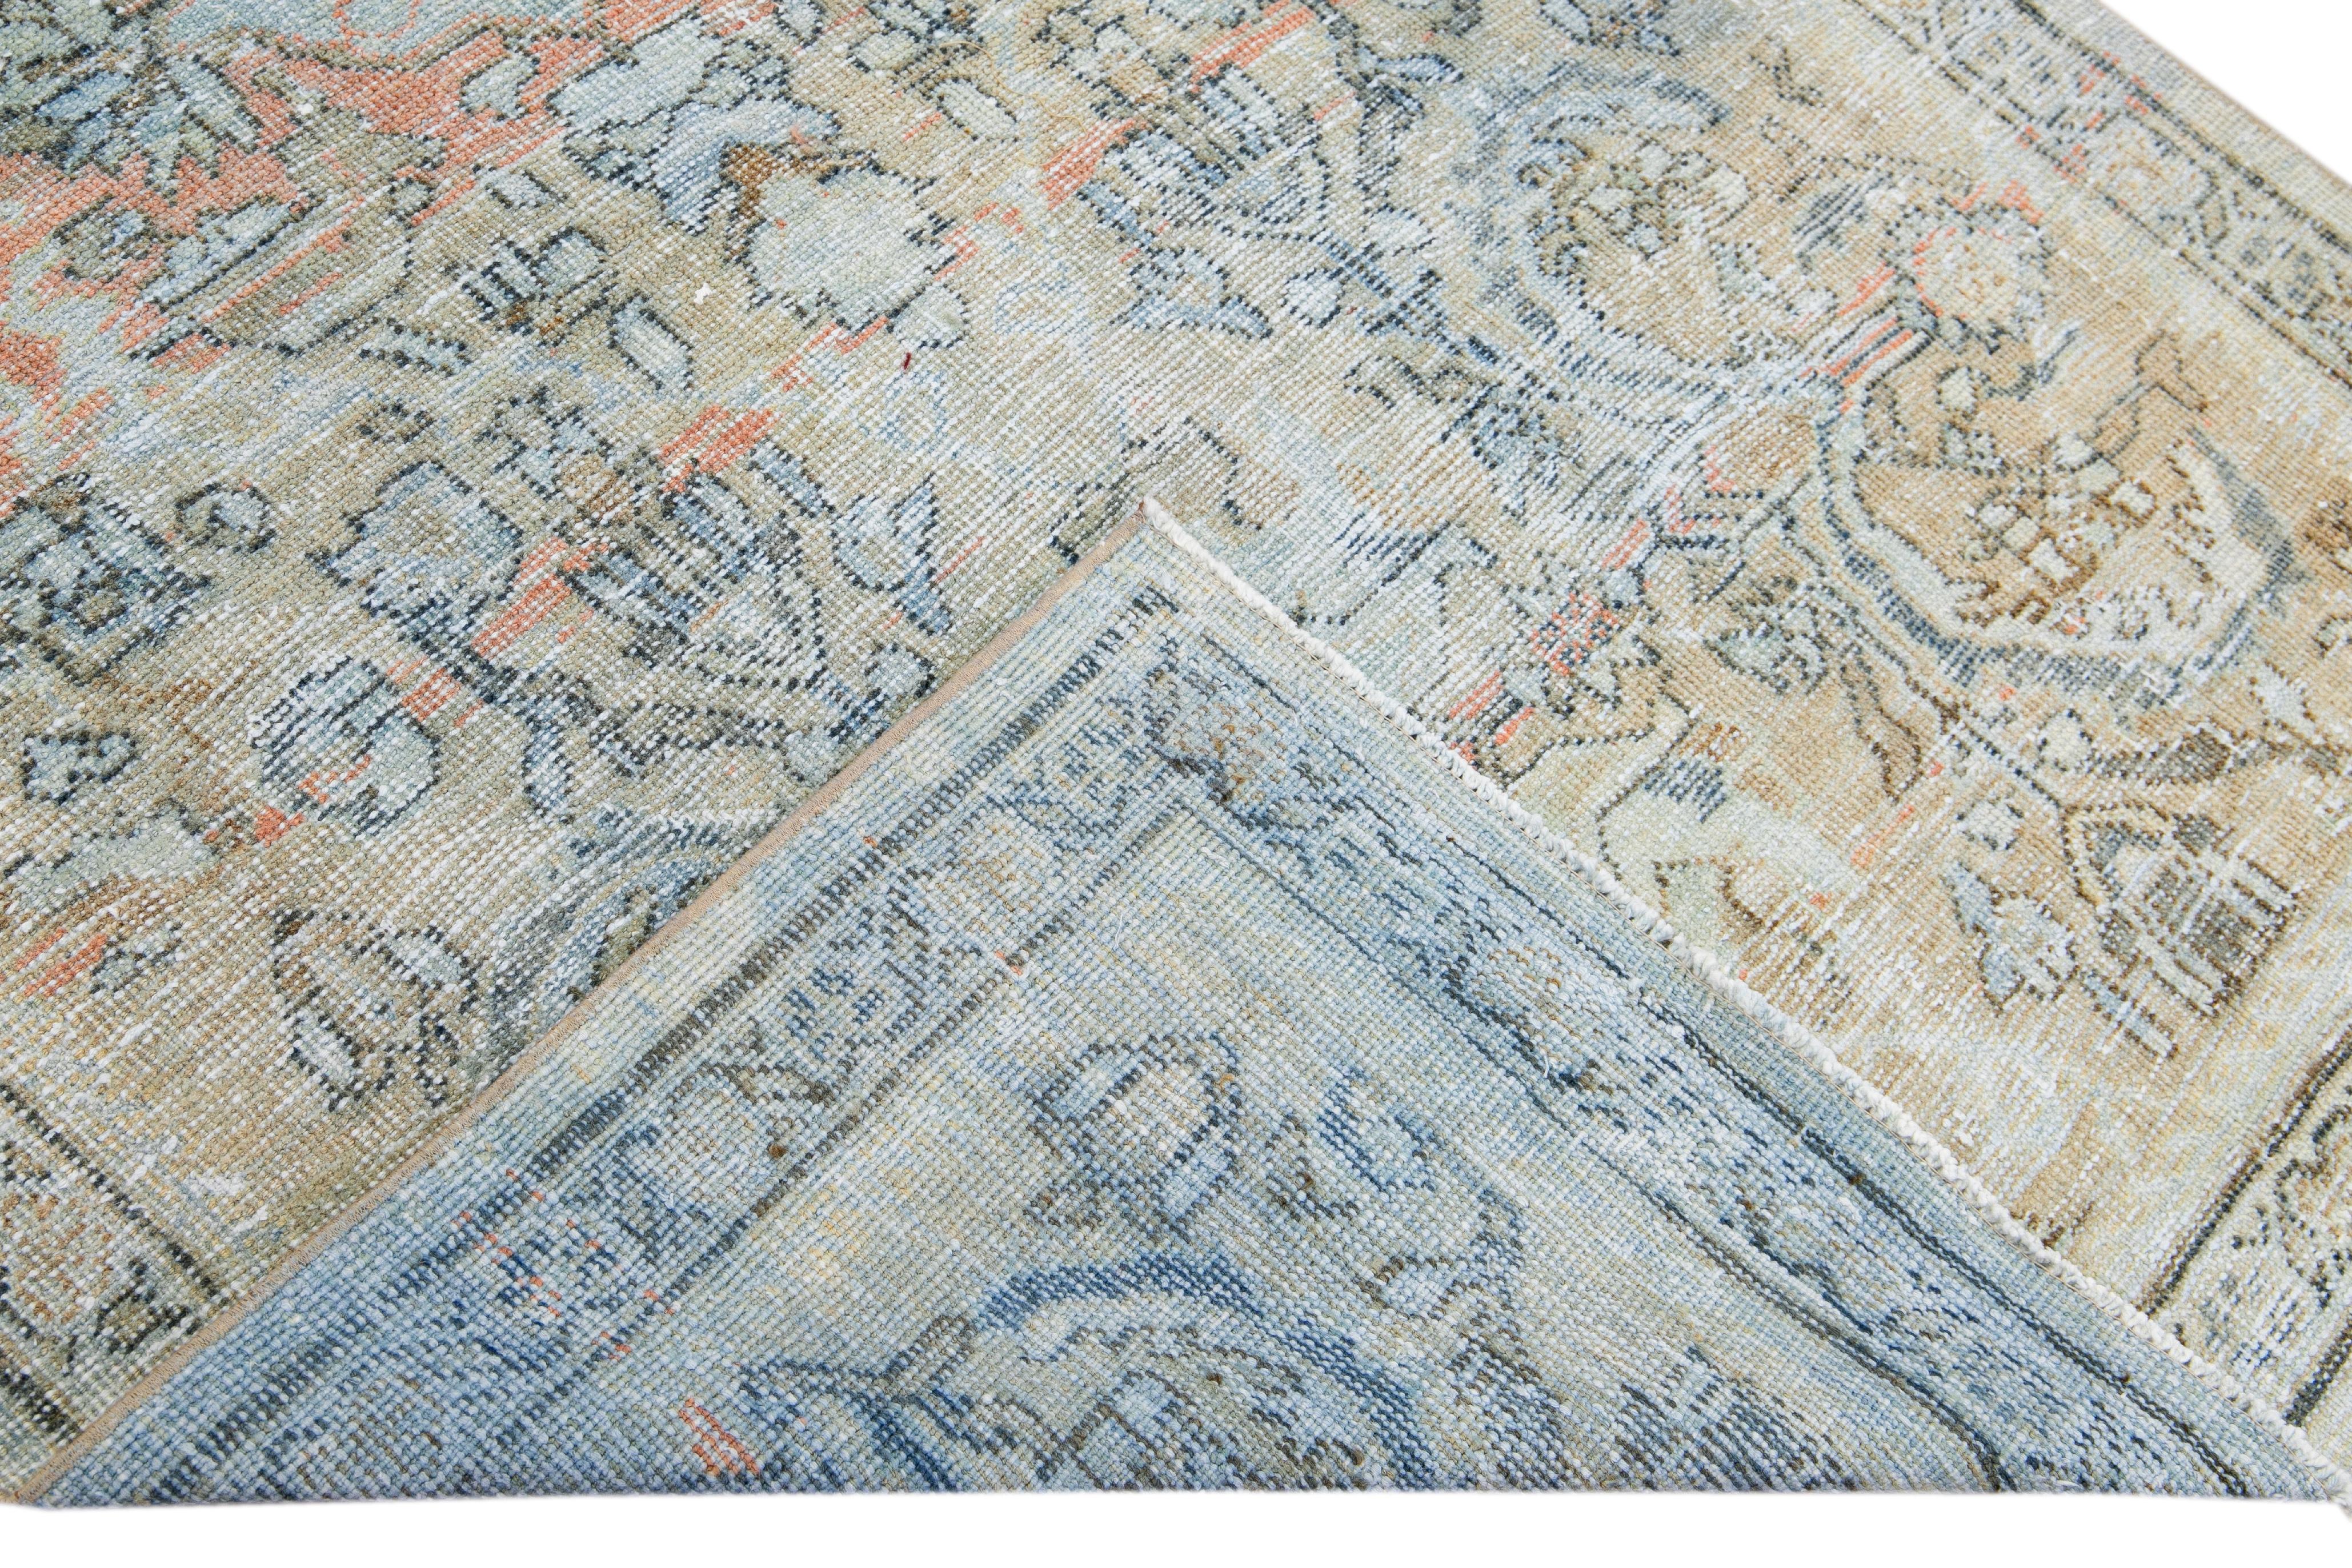 Beautiful antique Persian Mahal hand-knotted wool rug with a beige and orange field. This piece has a blue frame and accent in an all-over gorgeous floral design.

This rug measures: 4'6